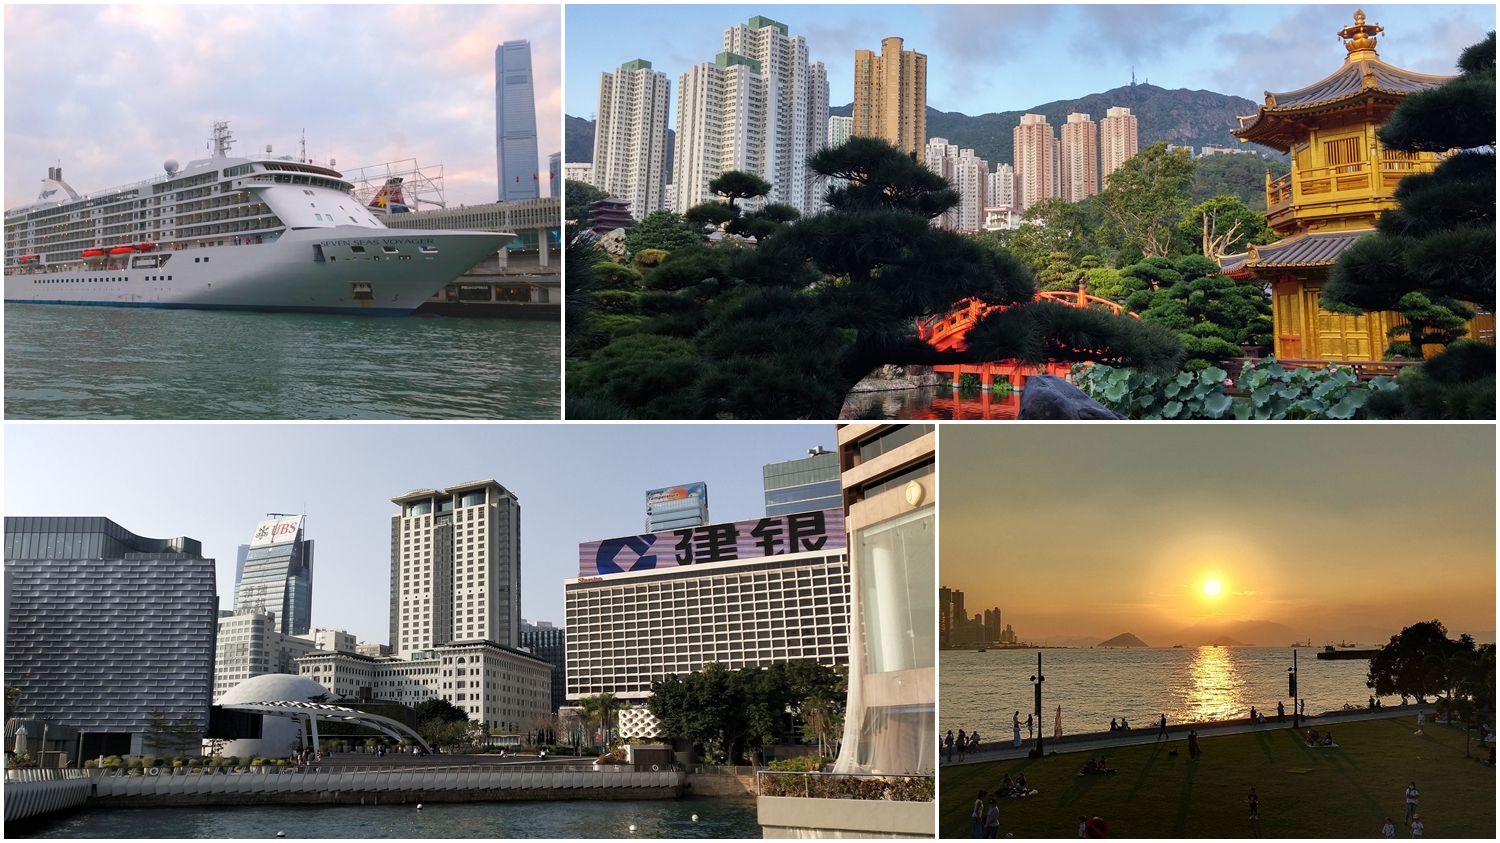 Frank shares 4 travelers’ FAQ about Kowloon